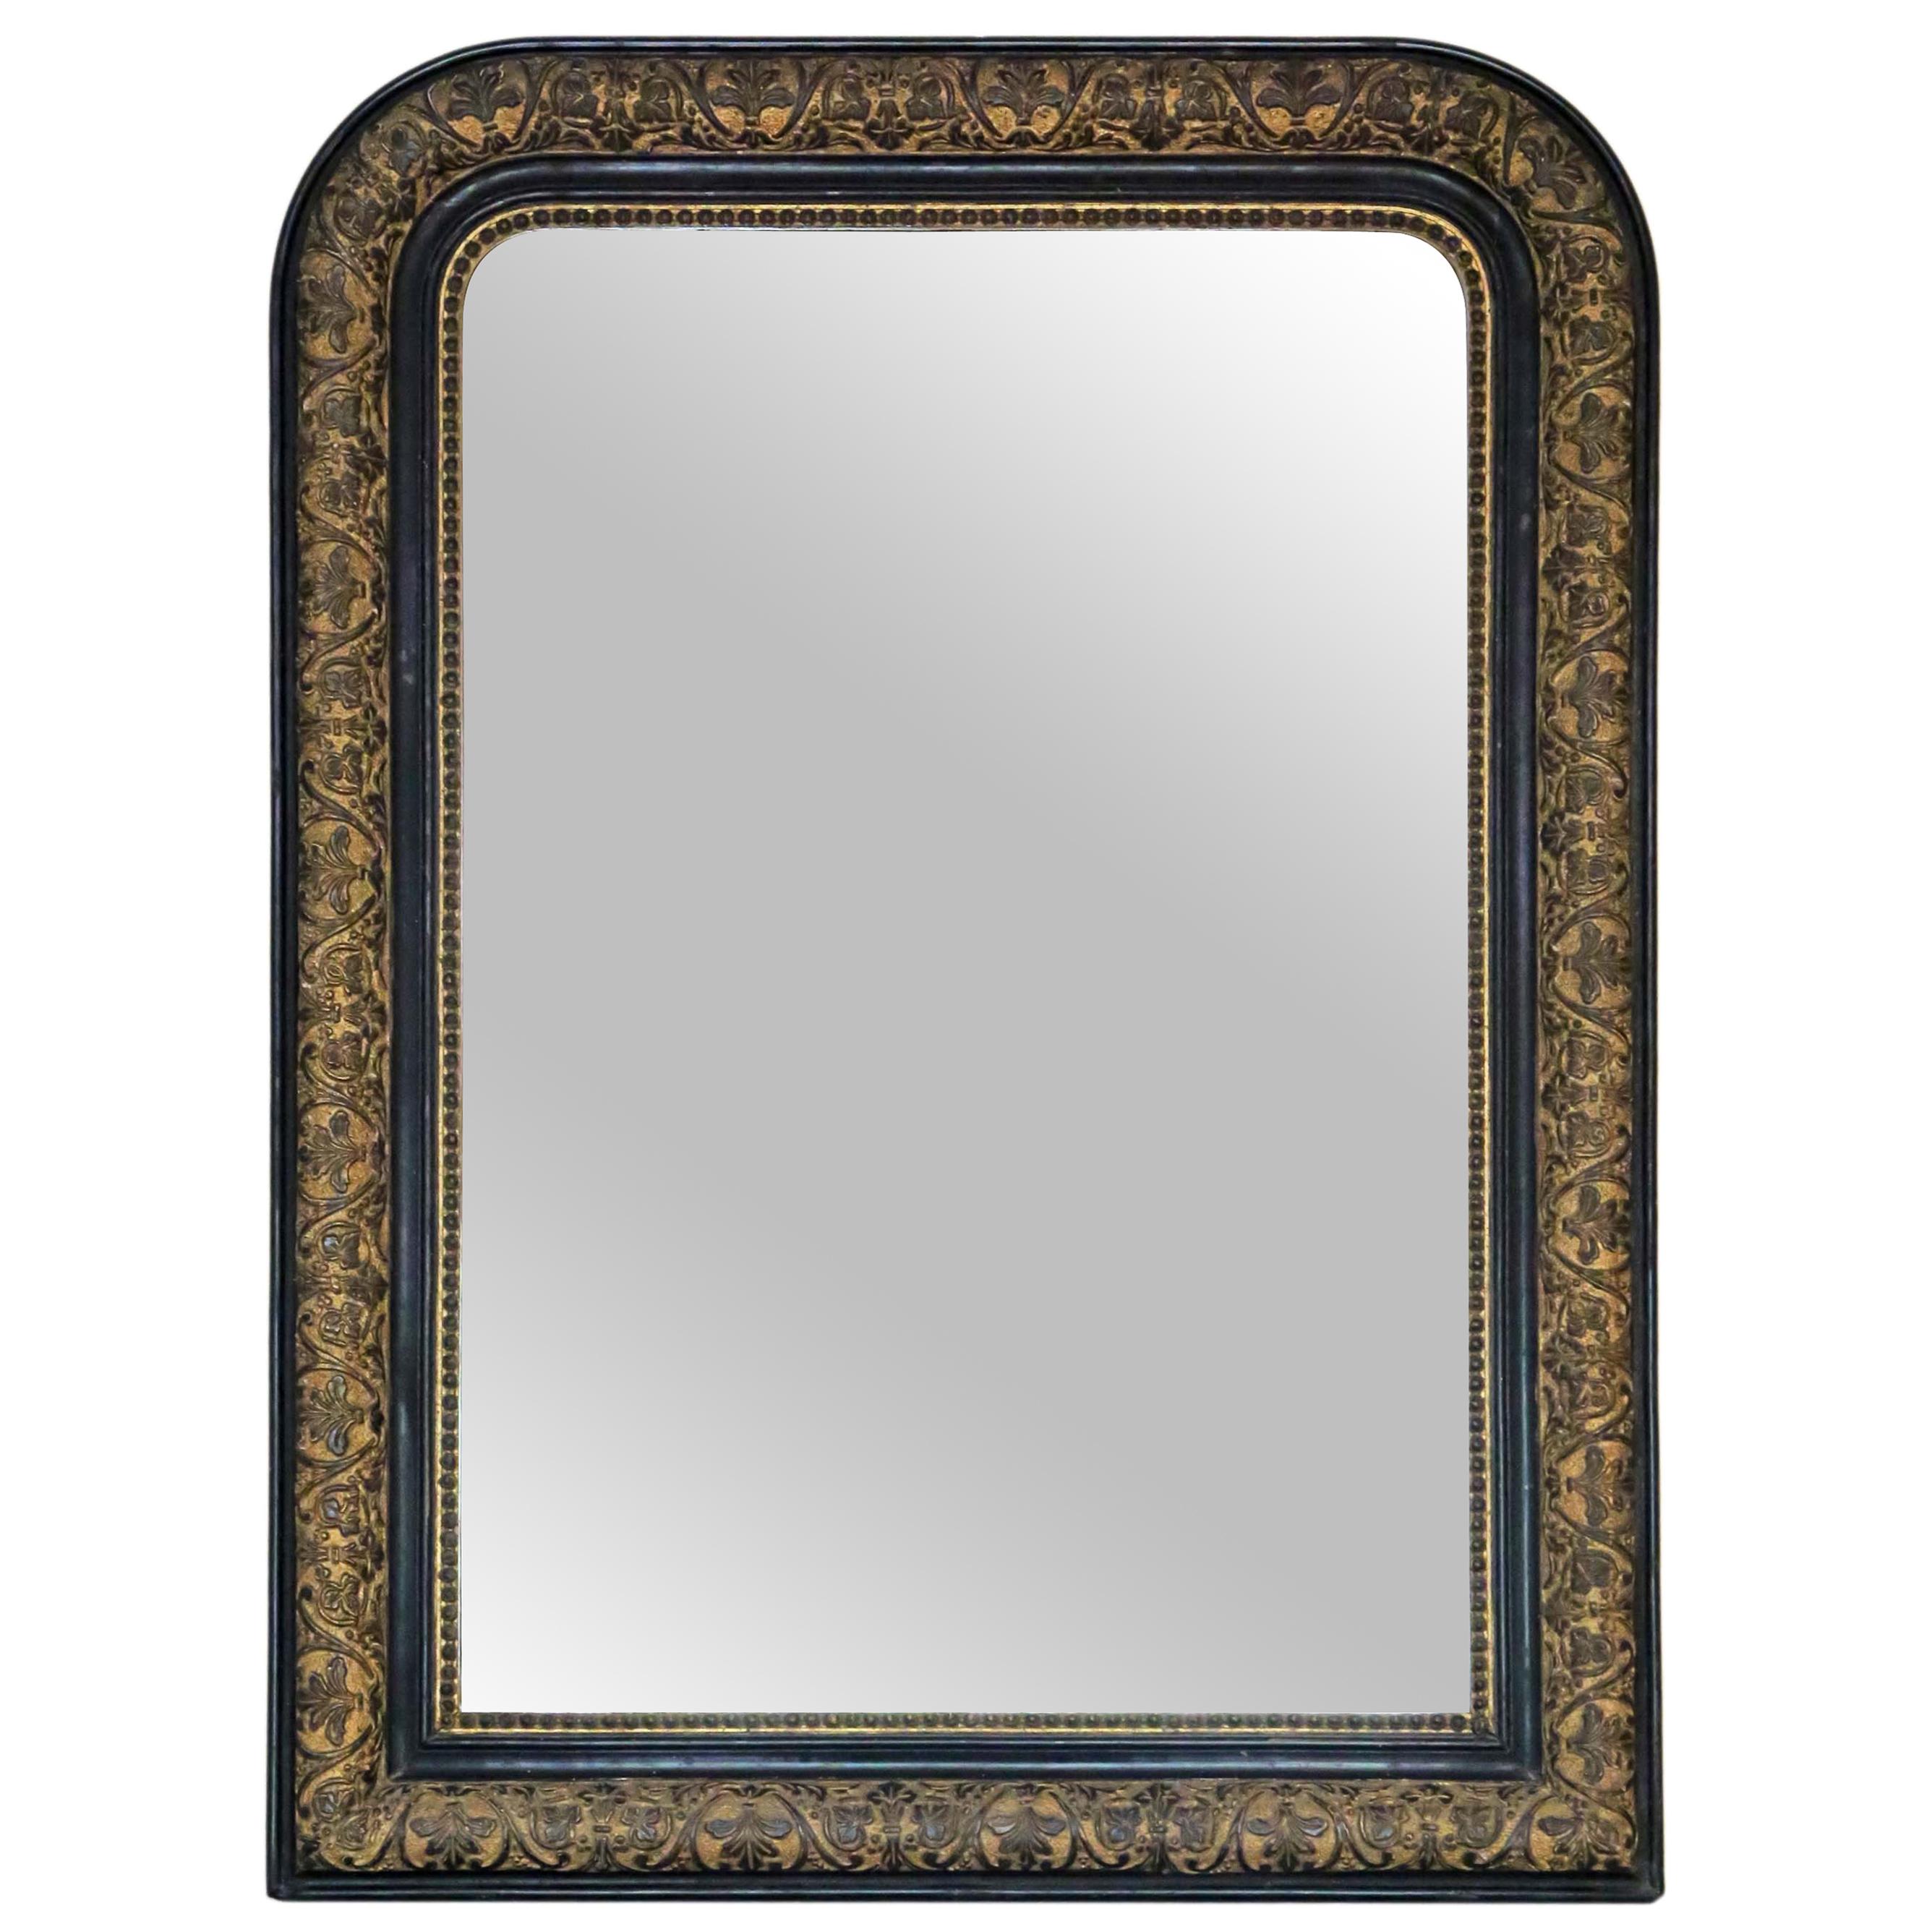 19th Century Ebonised and Gilt Finish Overmantle Wall Mirror